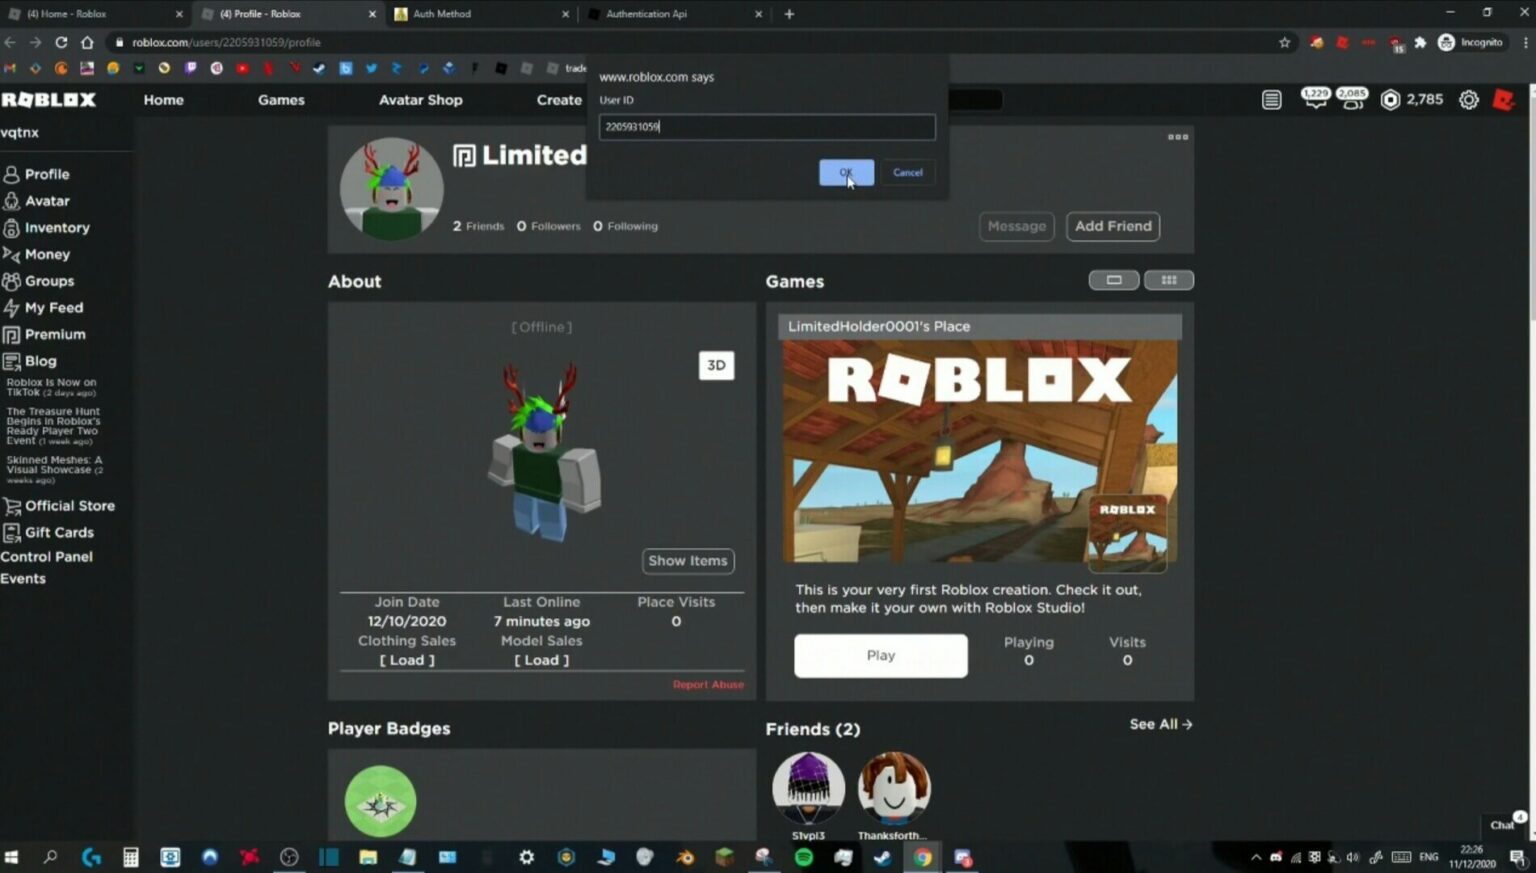 do you need an account to download roblox studio?